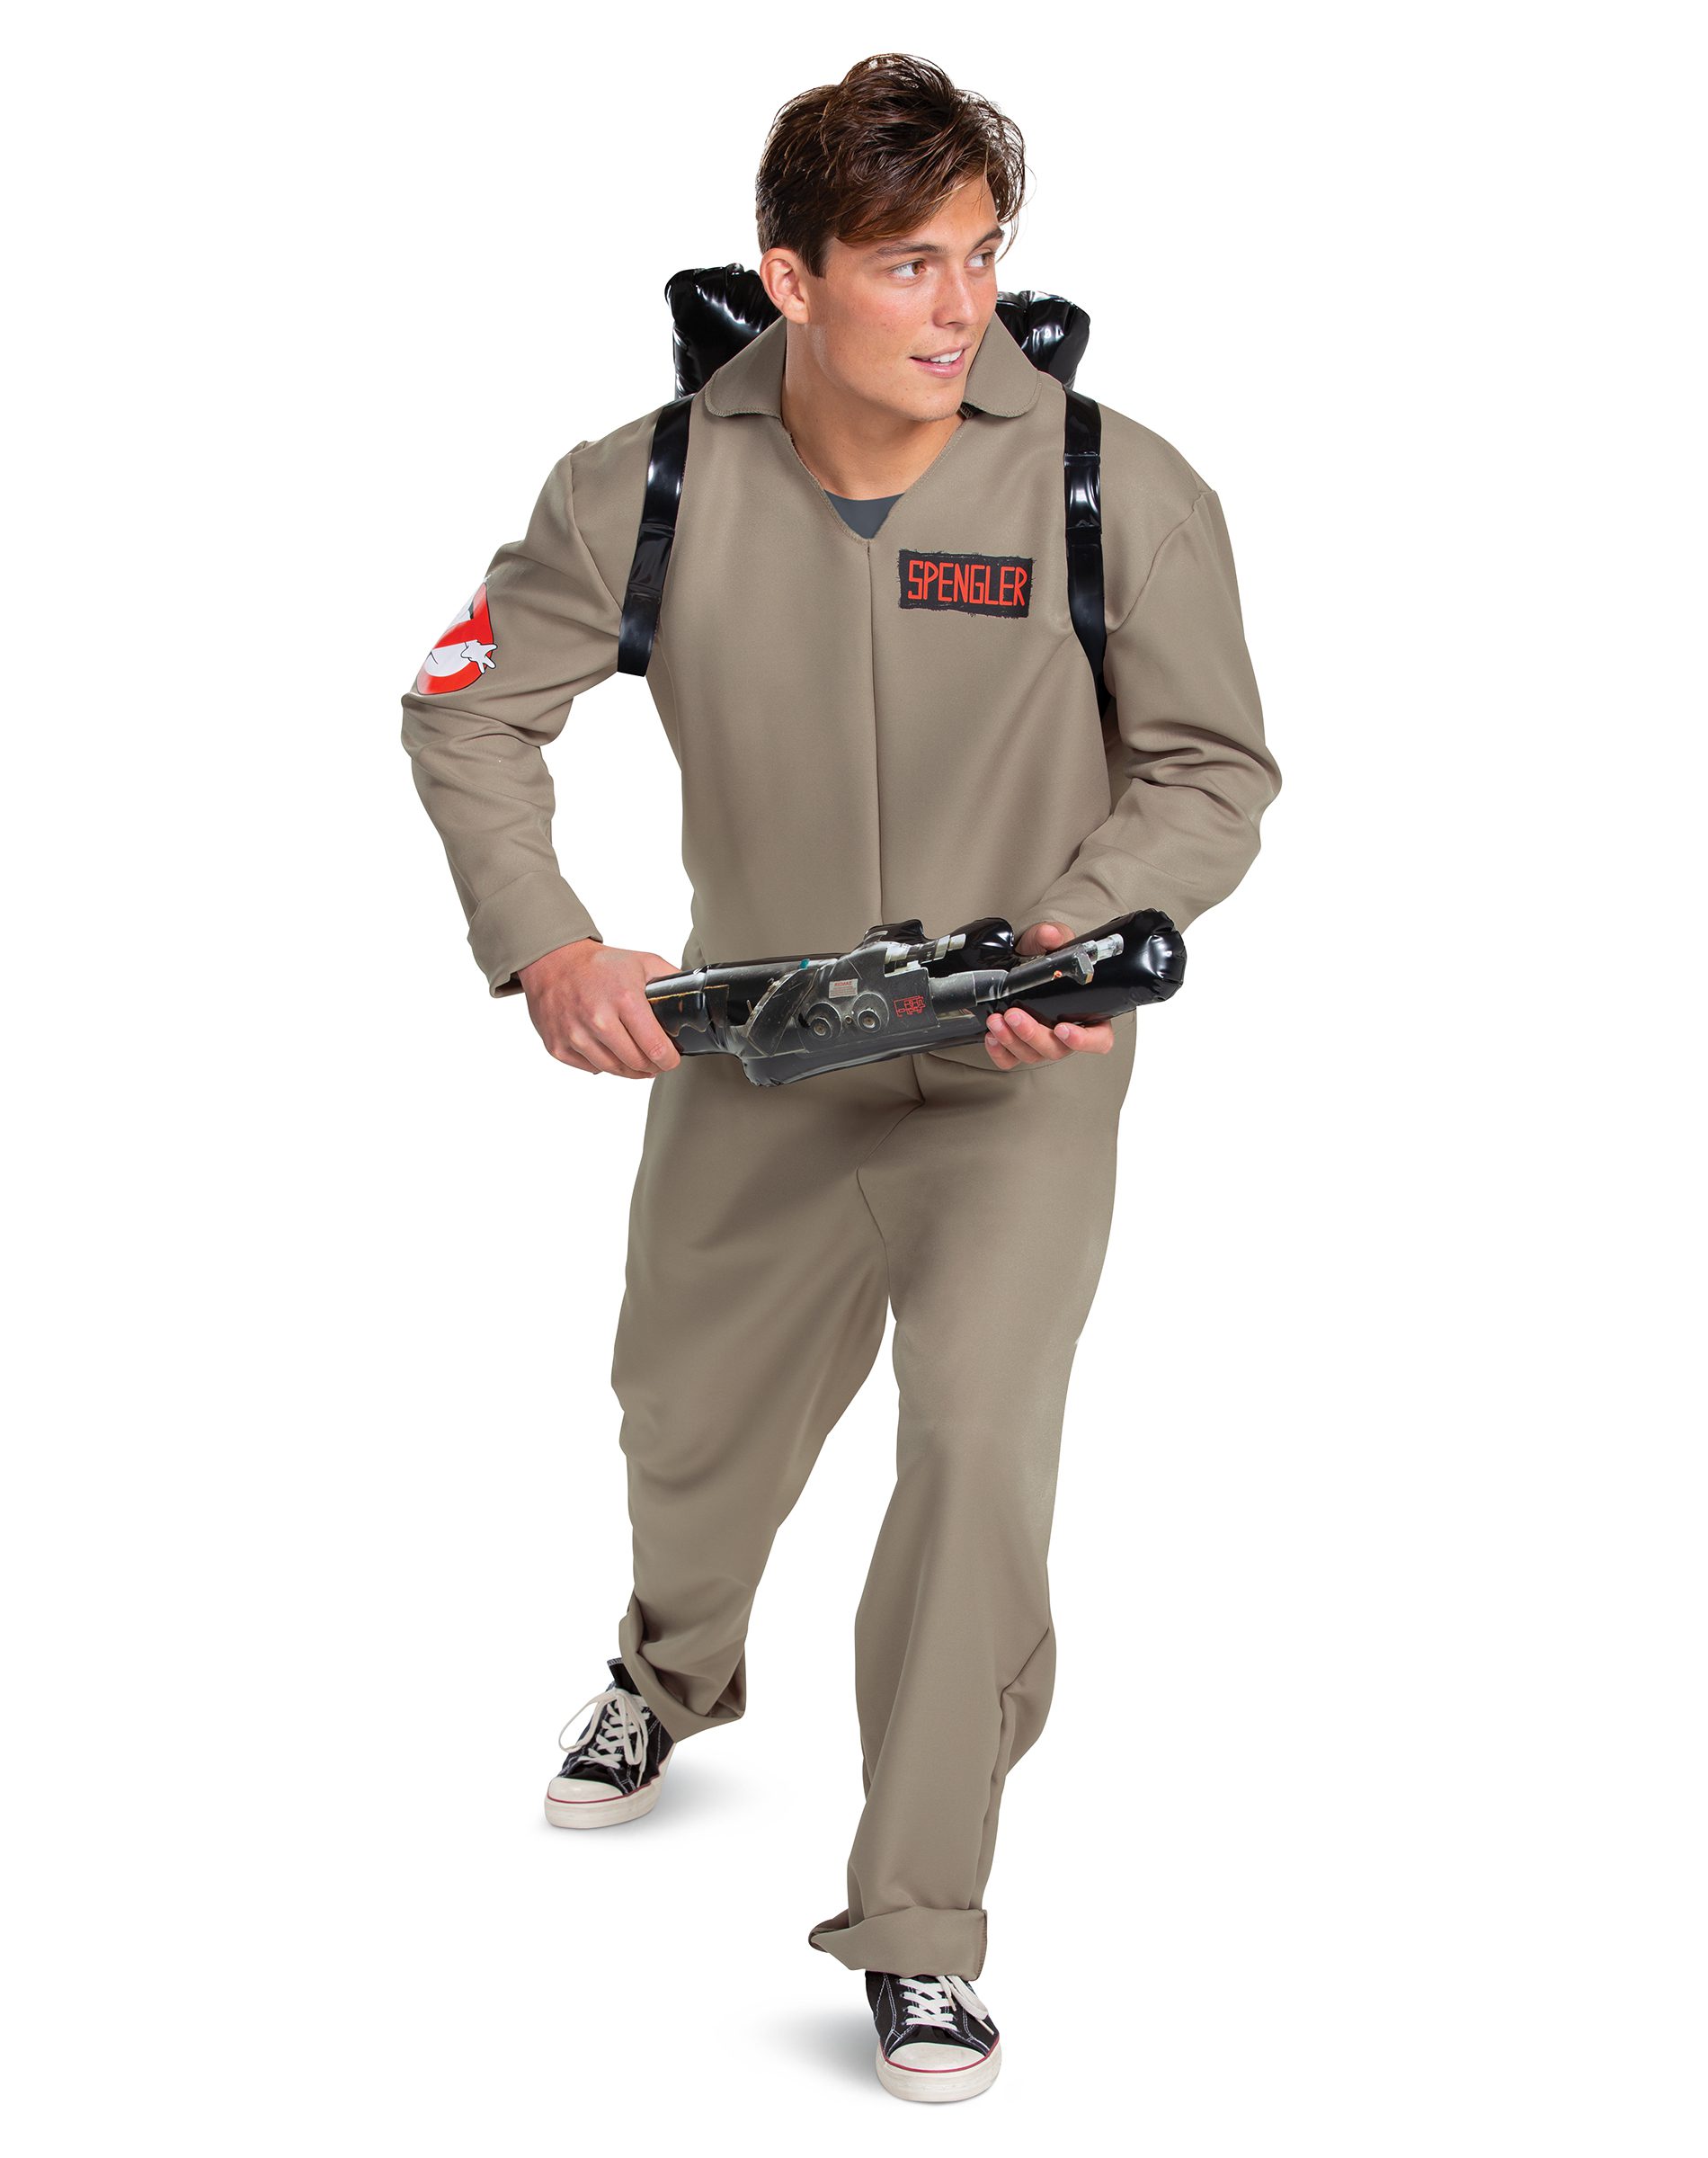 Ghostbusters Adult Costume - Costume Holiday House